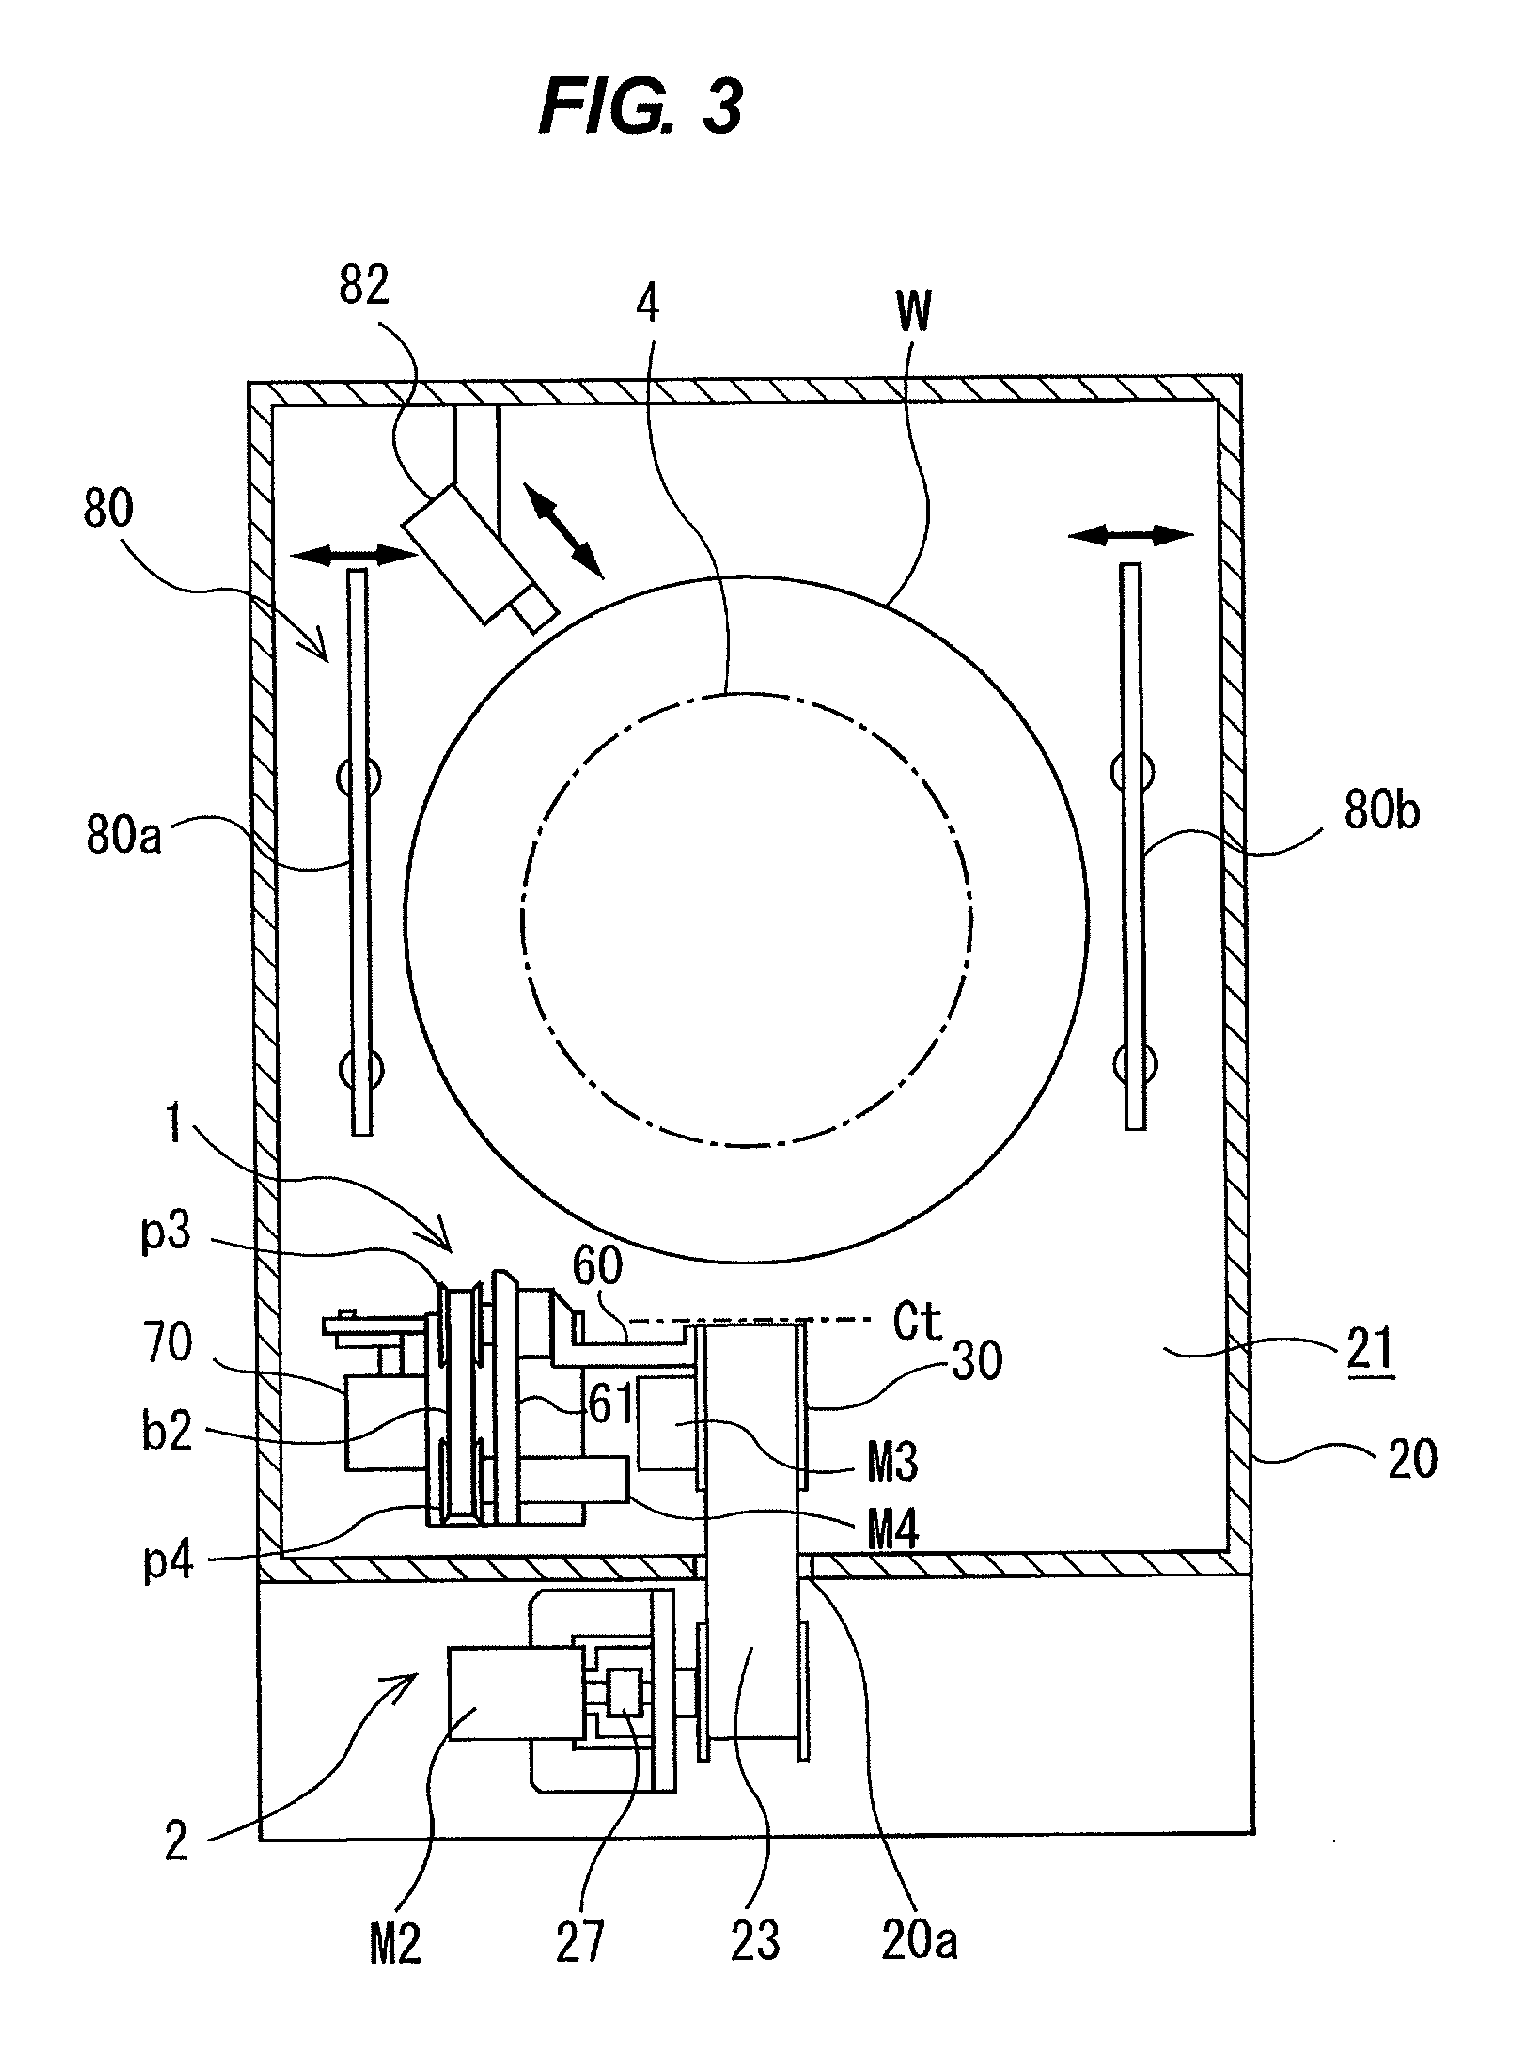 Method and apparatus for polishing a substrate having a grinded back surface